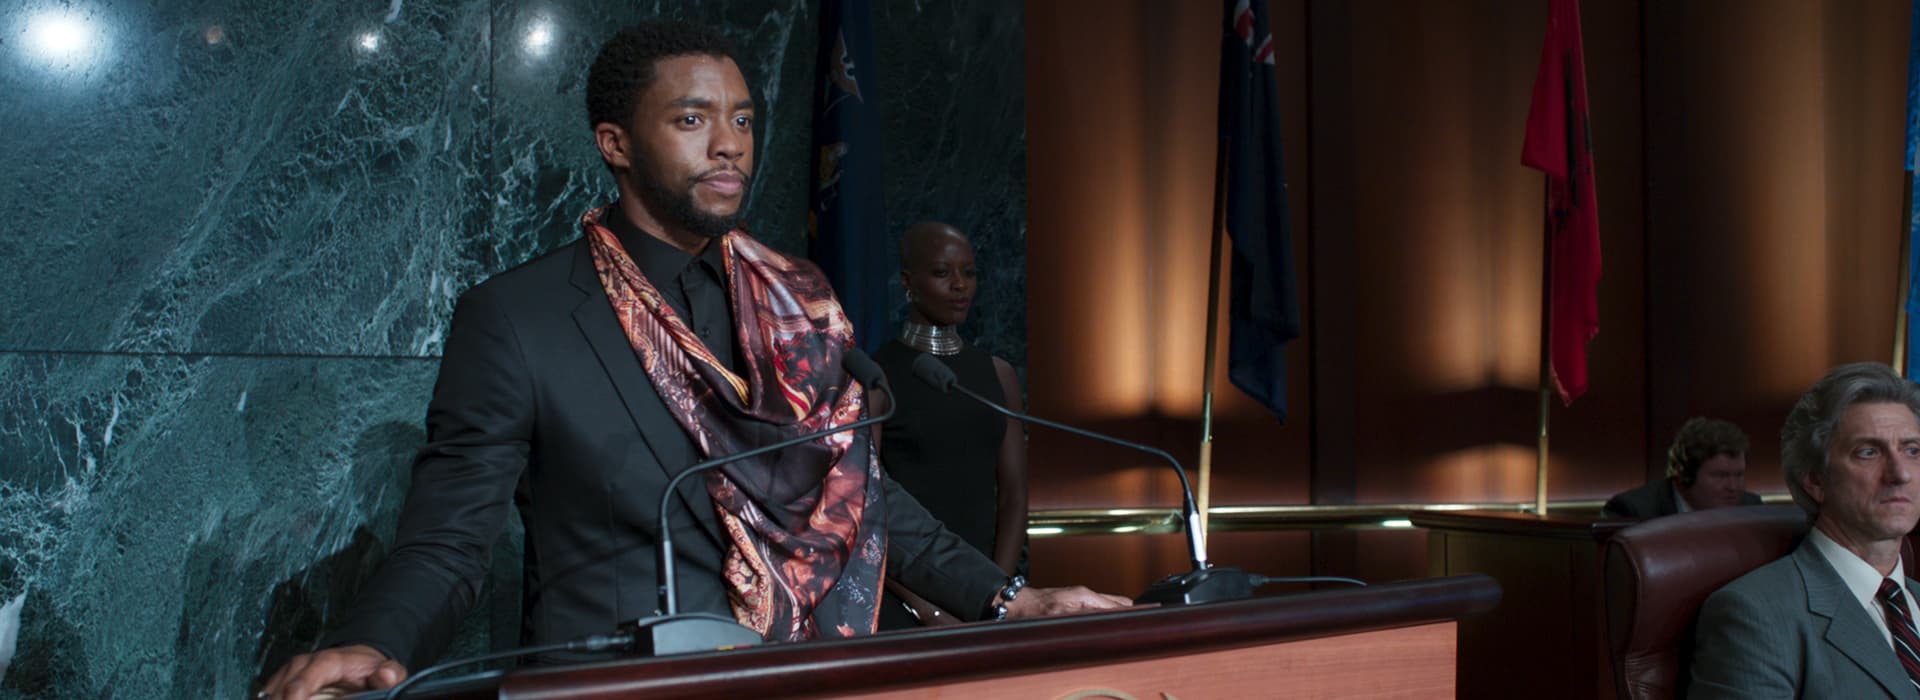 Black Panther (T'Challa)